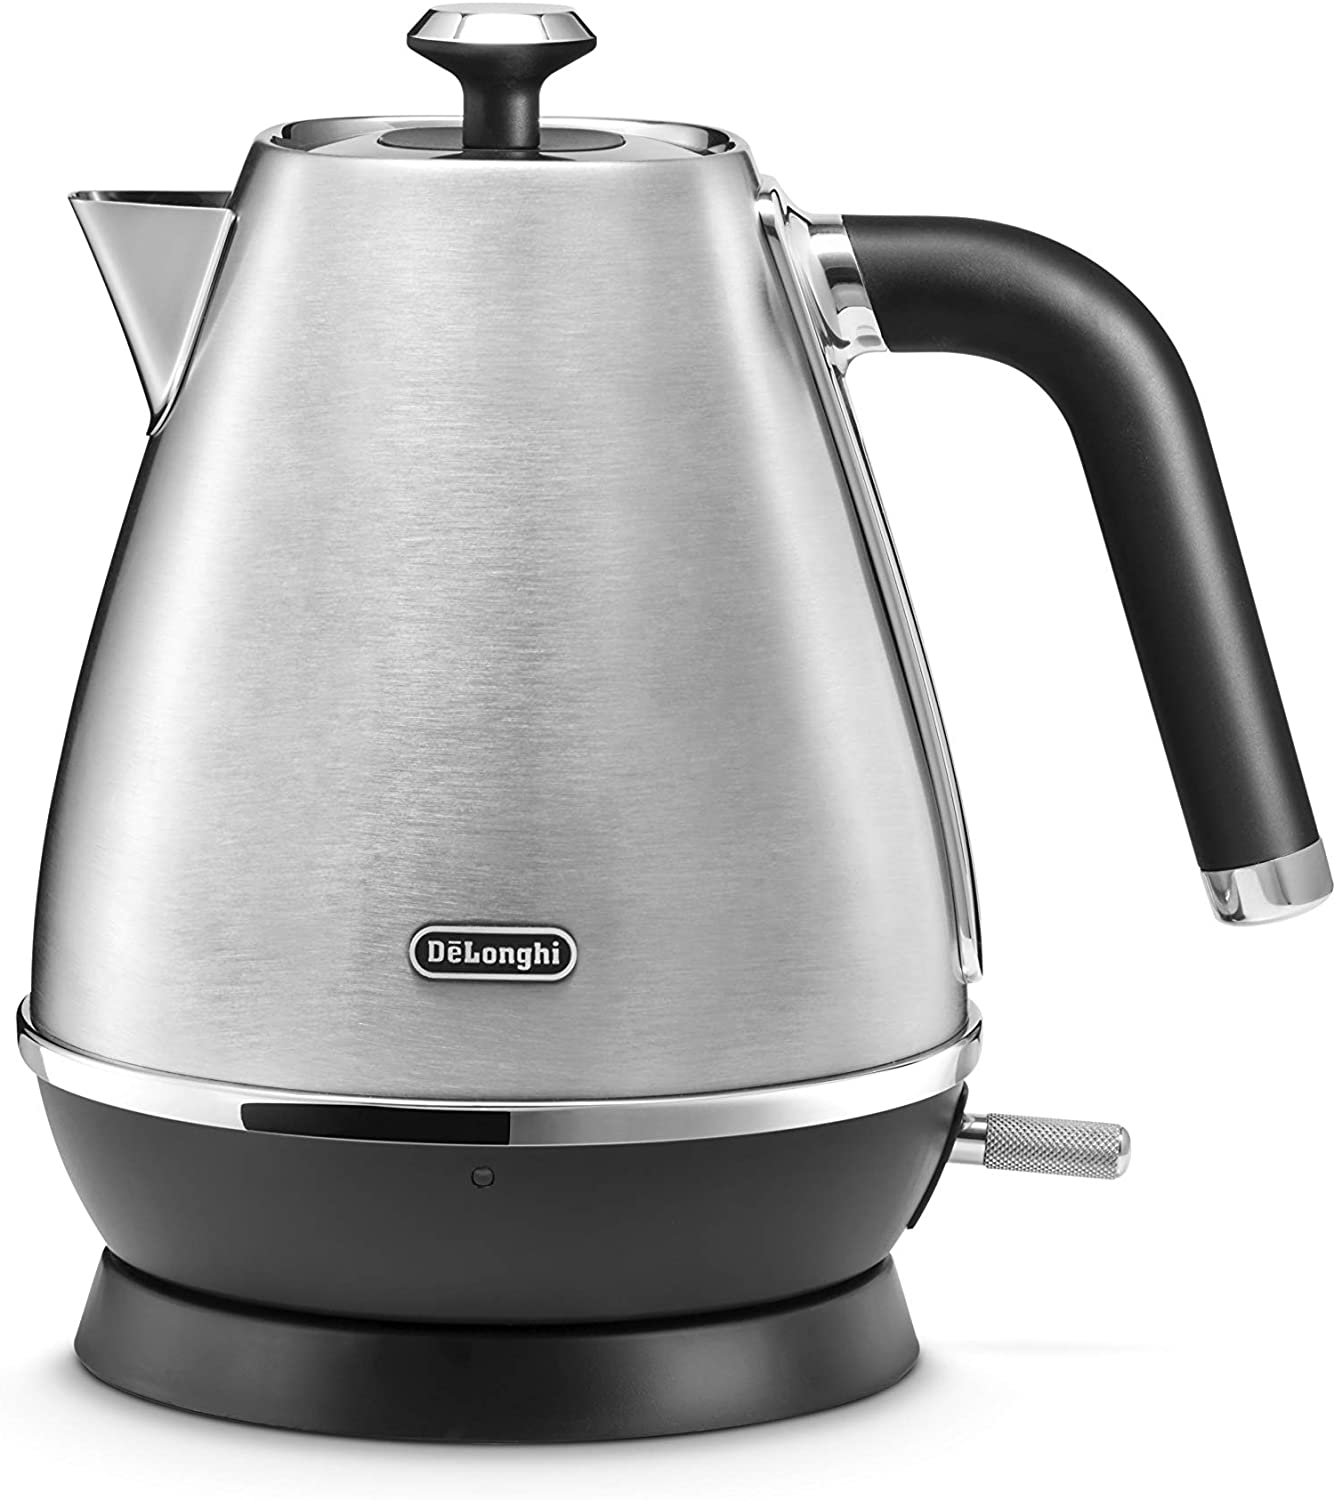 DeLonghi De\'Longhi Distinta X KBI2001.M-1.7 L Kettle with Water Level Indicator and